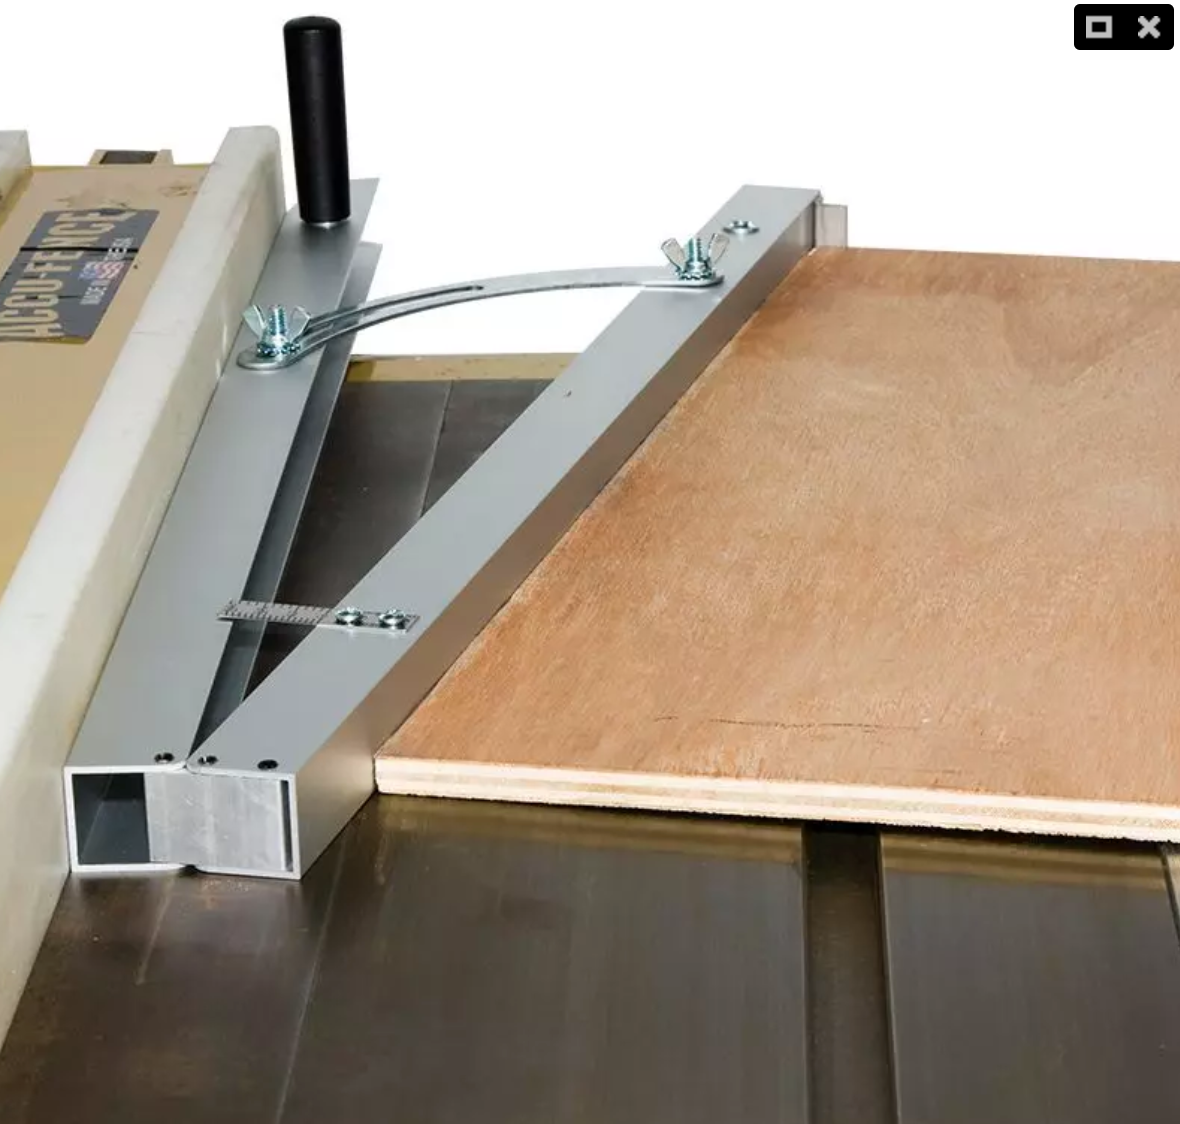 Taper Cutting Jig for Table Saws or Bandsaws